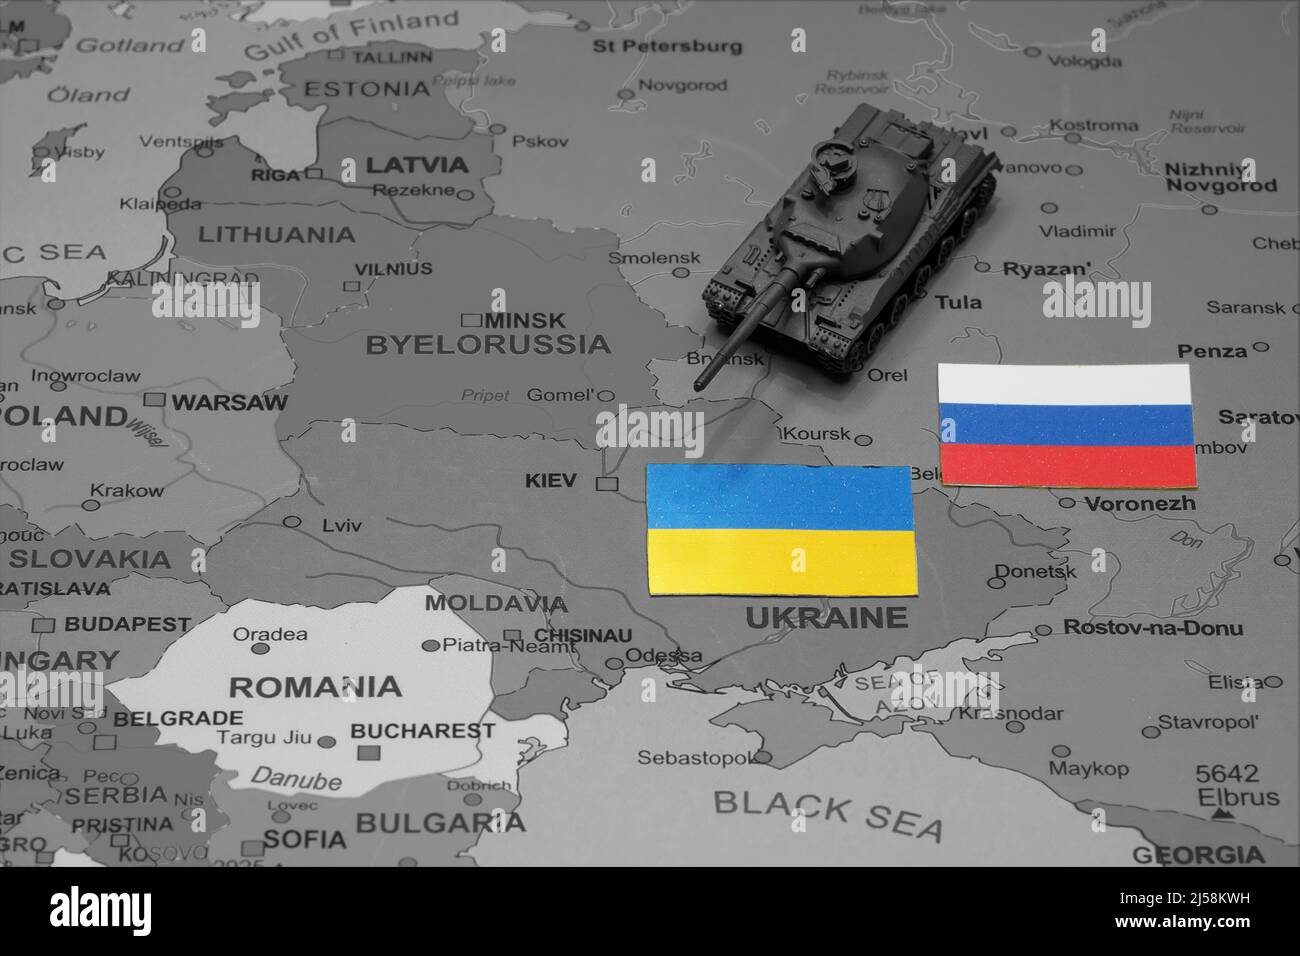 Toy tank on the map. Military operations in Ukraine. Stock Photo